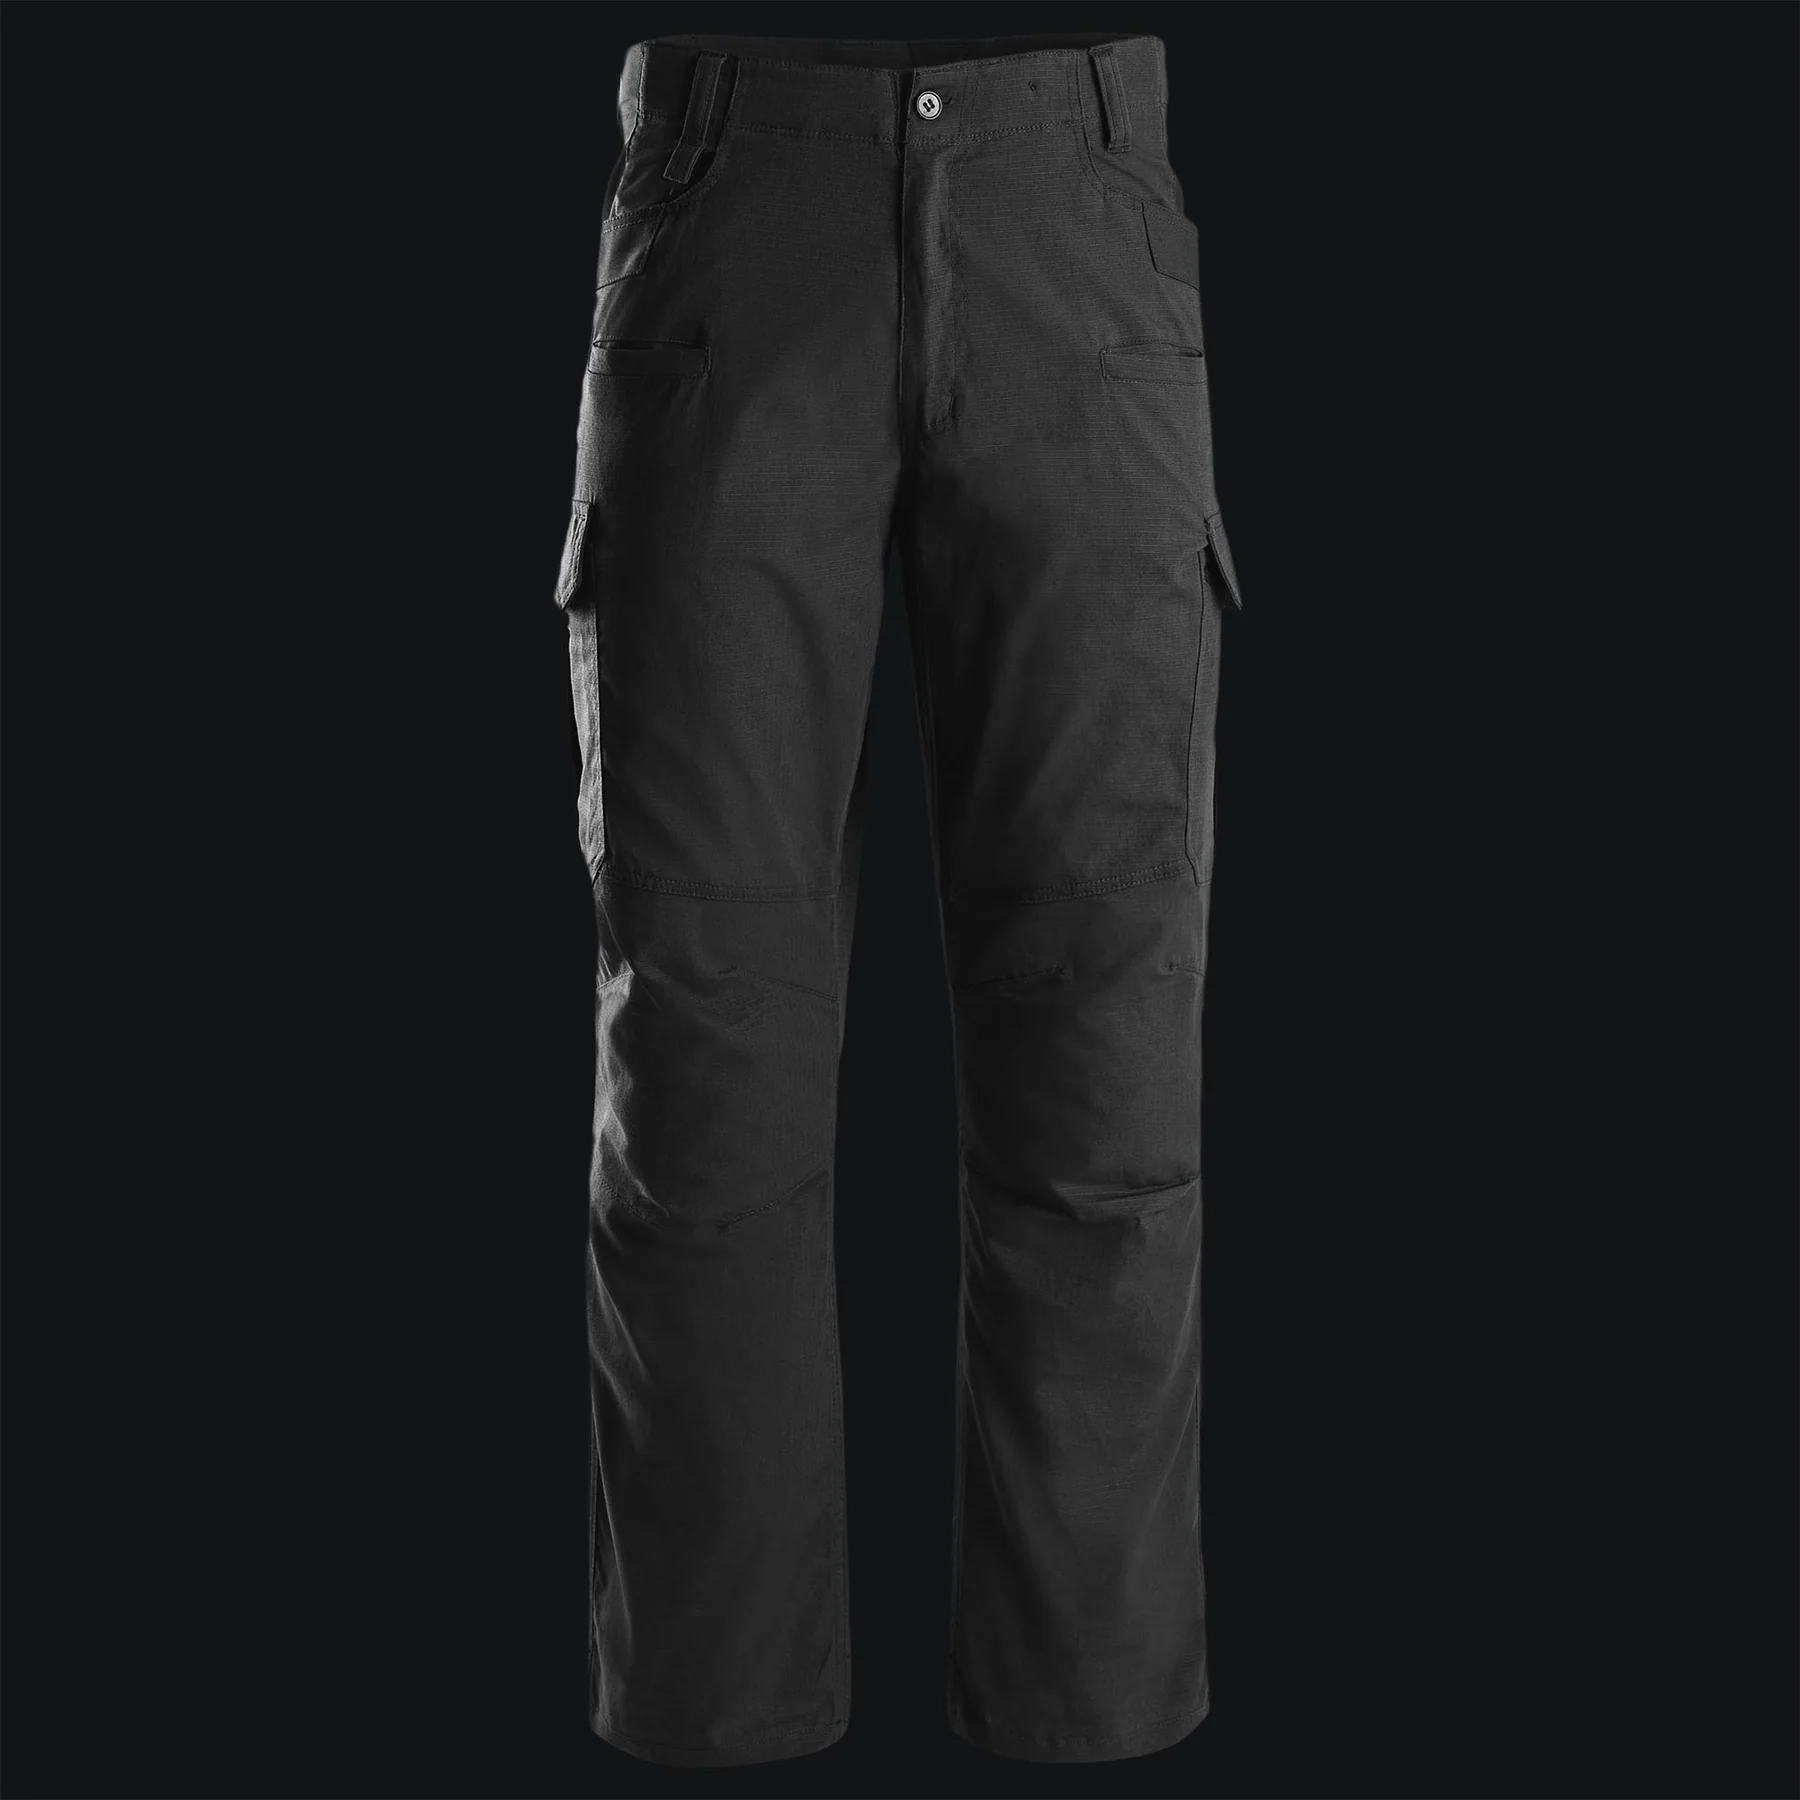 STOIRM TACTICAL Ripstop Combat Trousers- Black